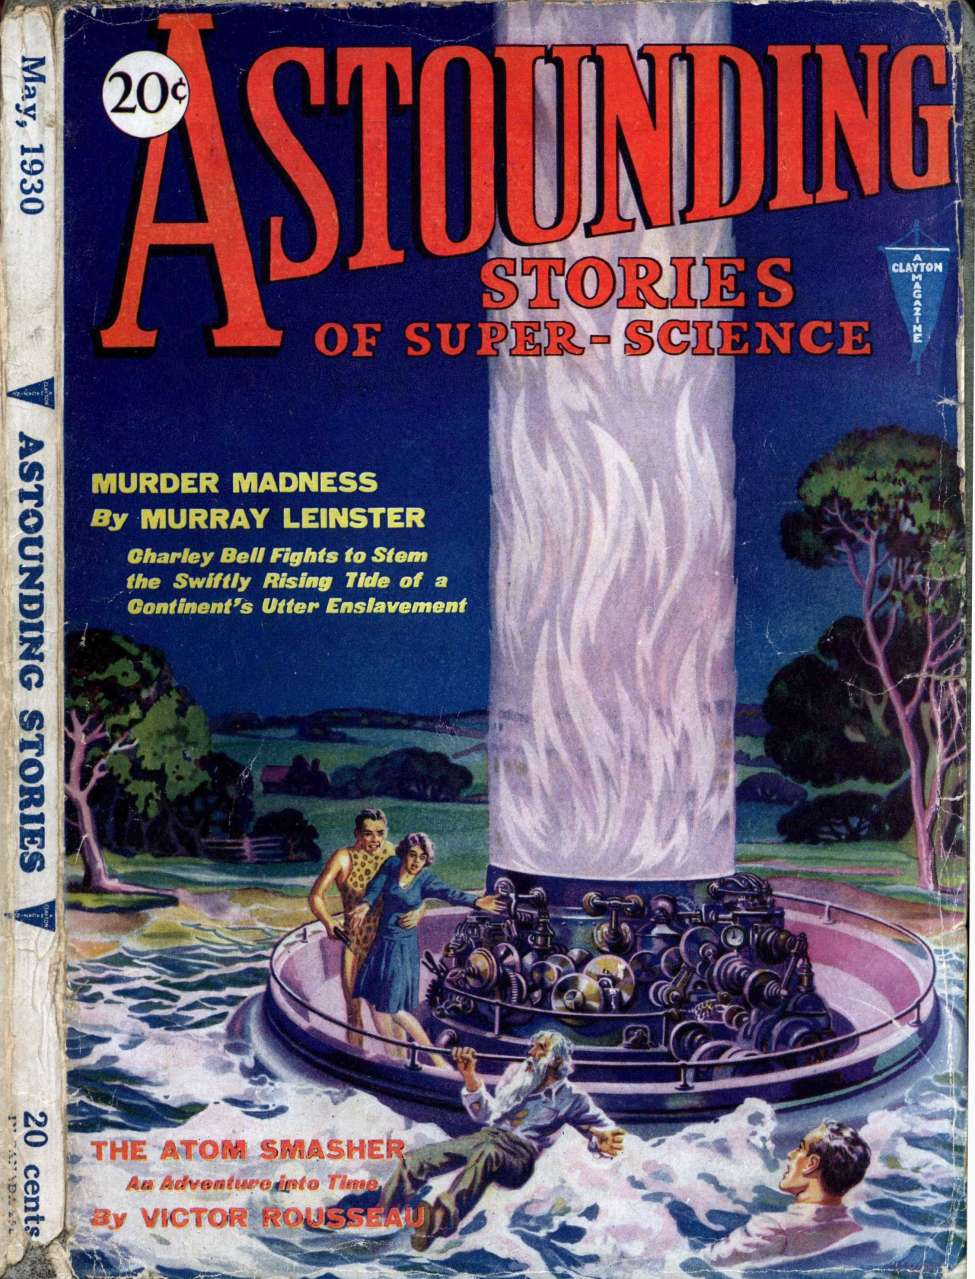 Comic Book Cover For Astounding Serial - Murder Madness - M Leinster